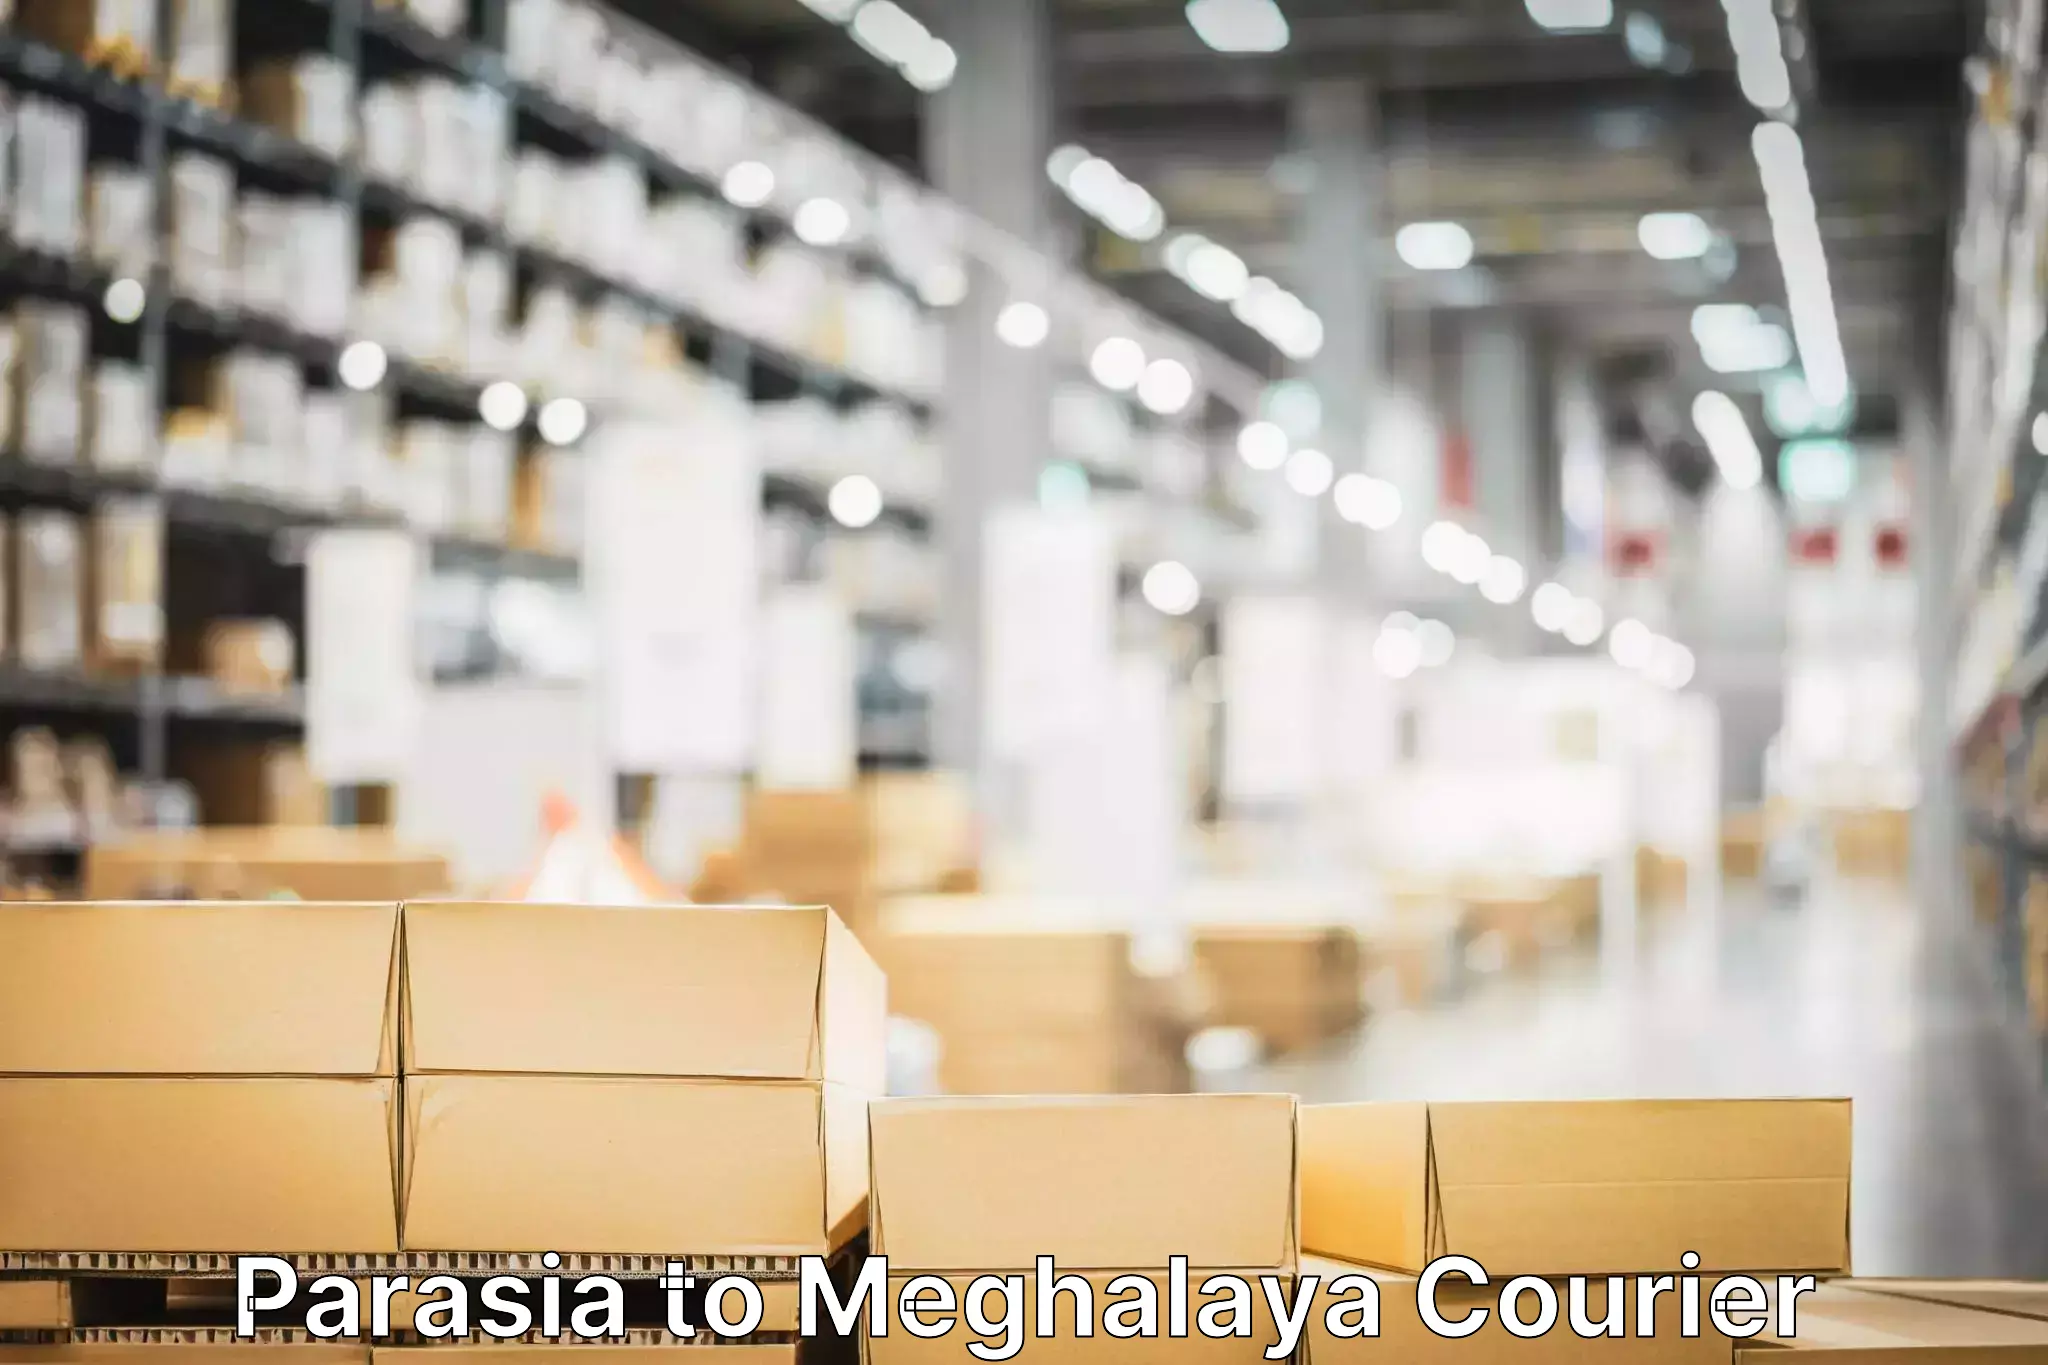 Expedited parcel delivery Parasia to Meghalaya